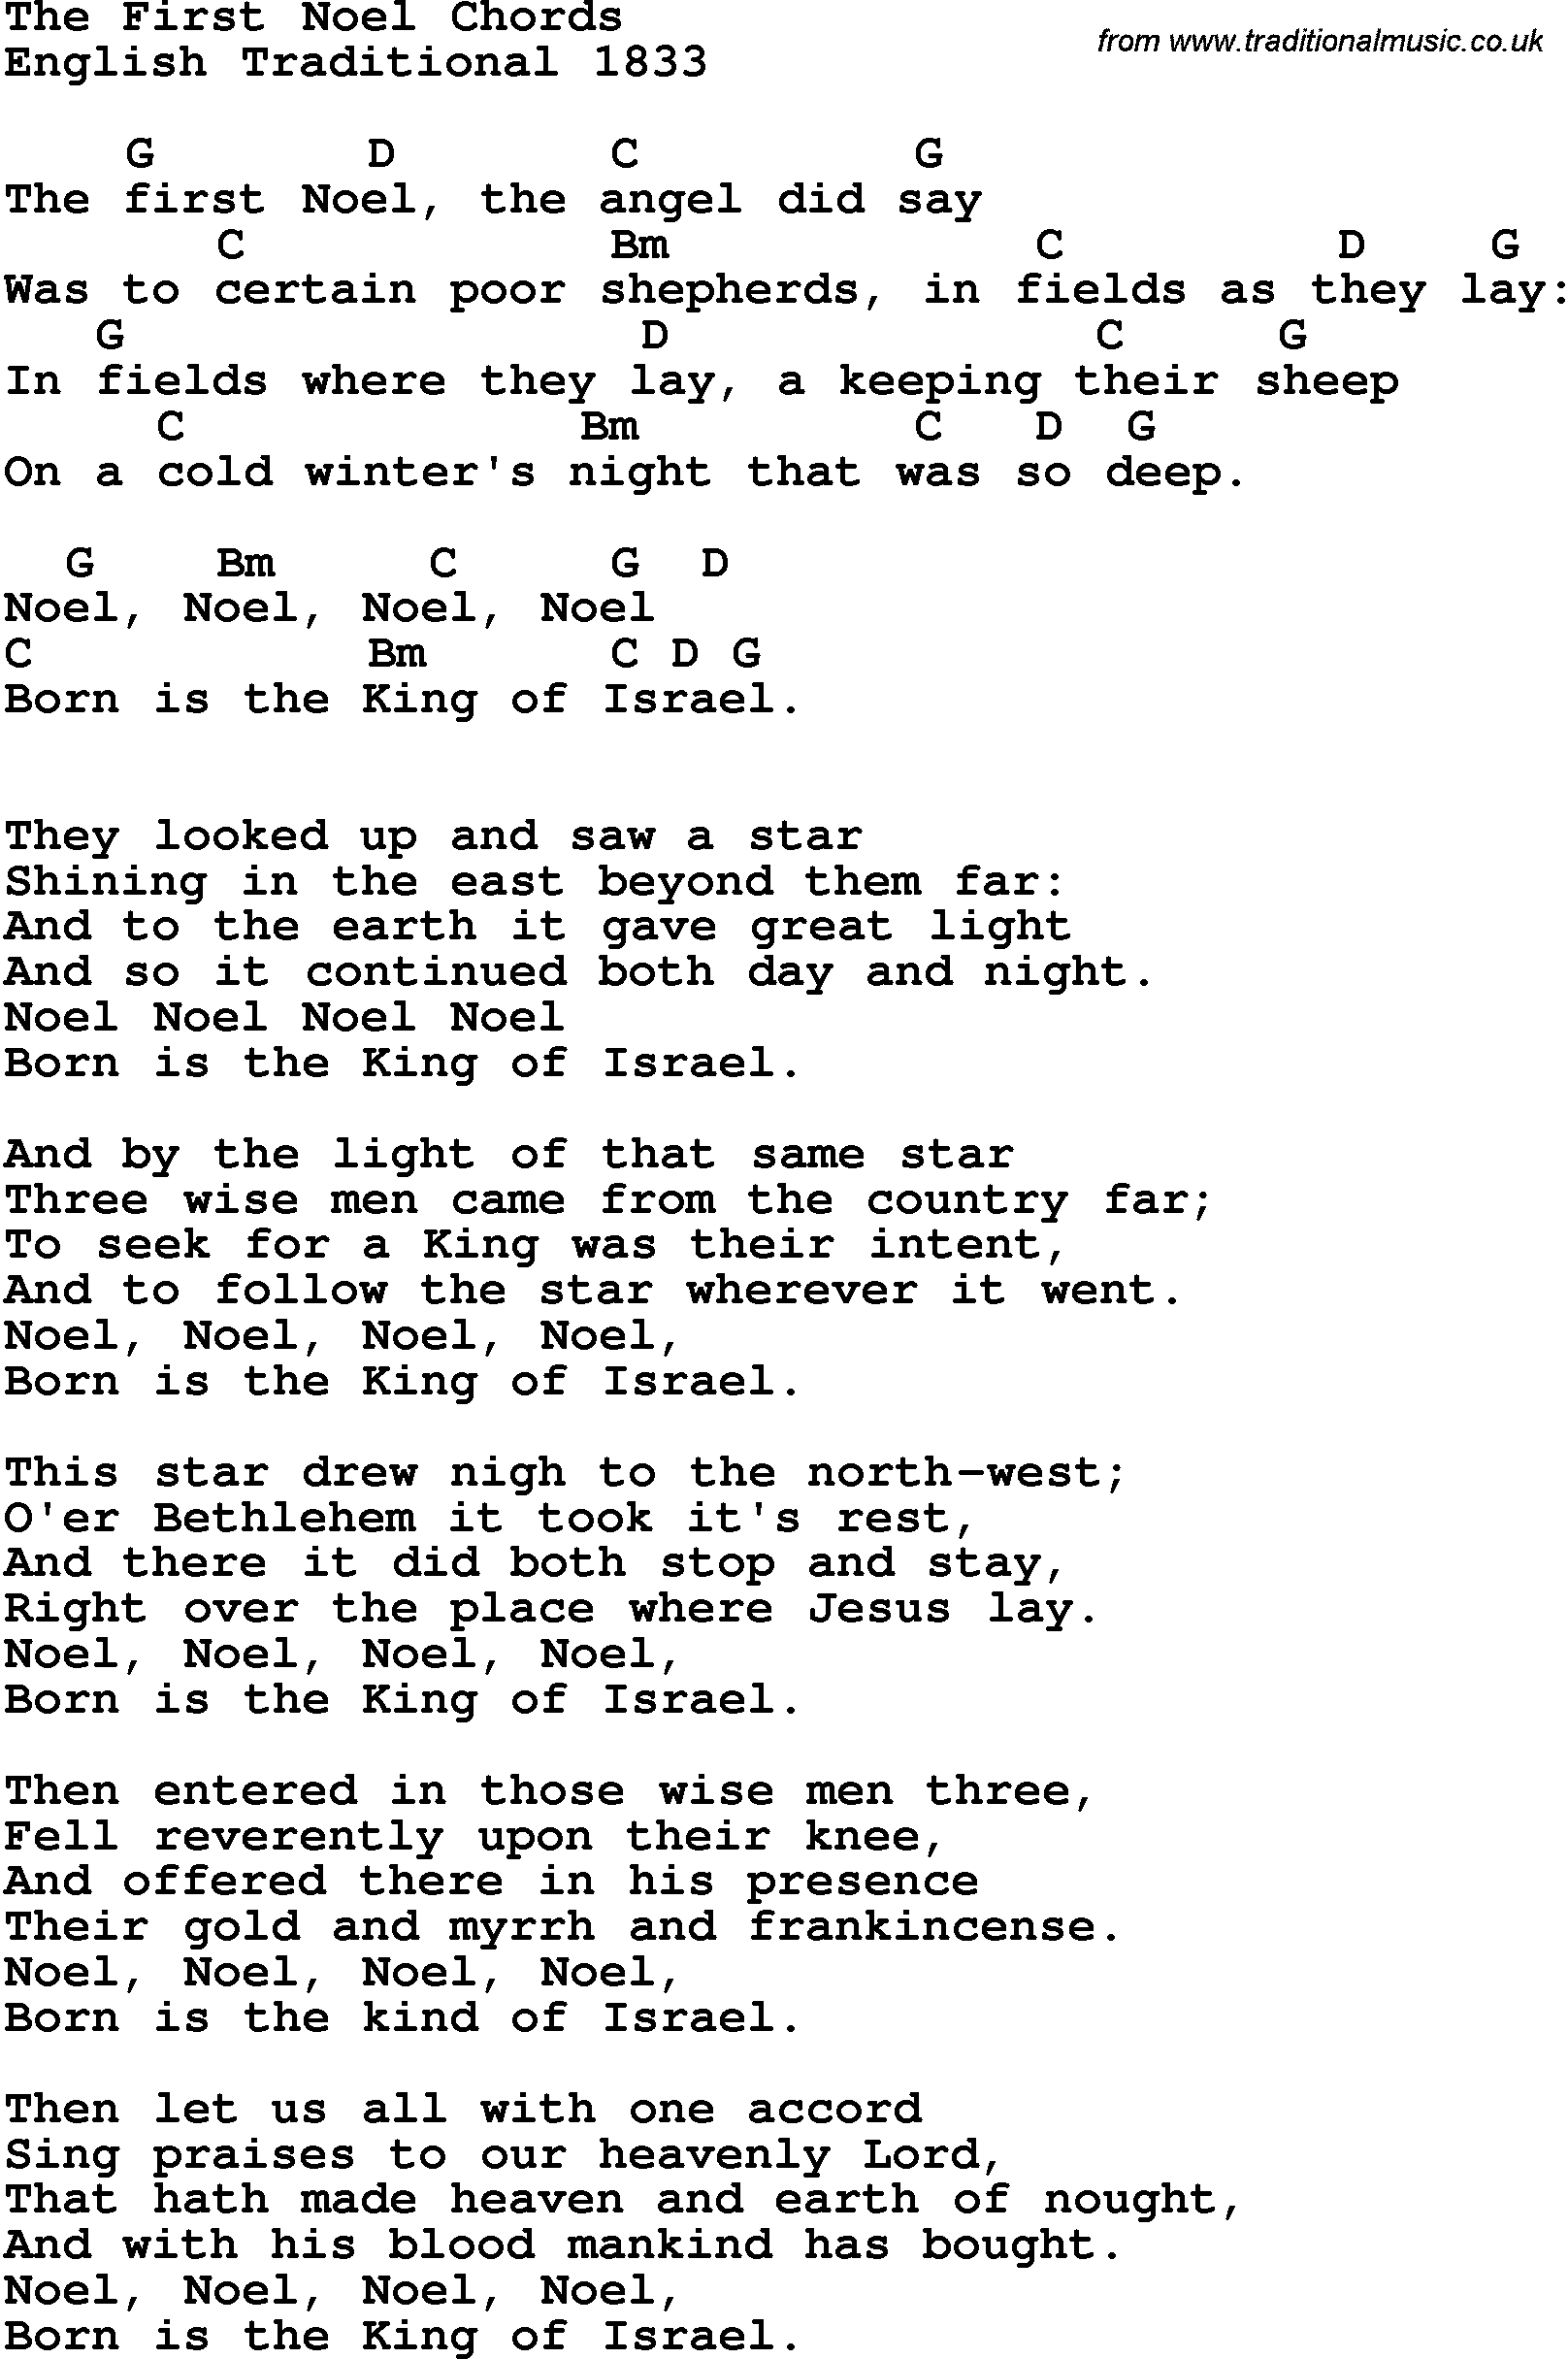 Song Lyrics with guitar chords for The First Noel - Trad